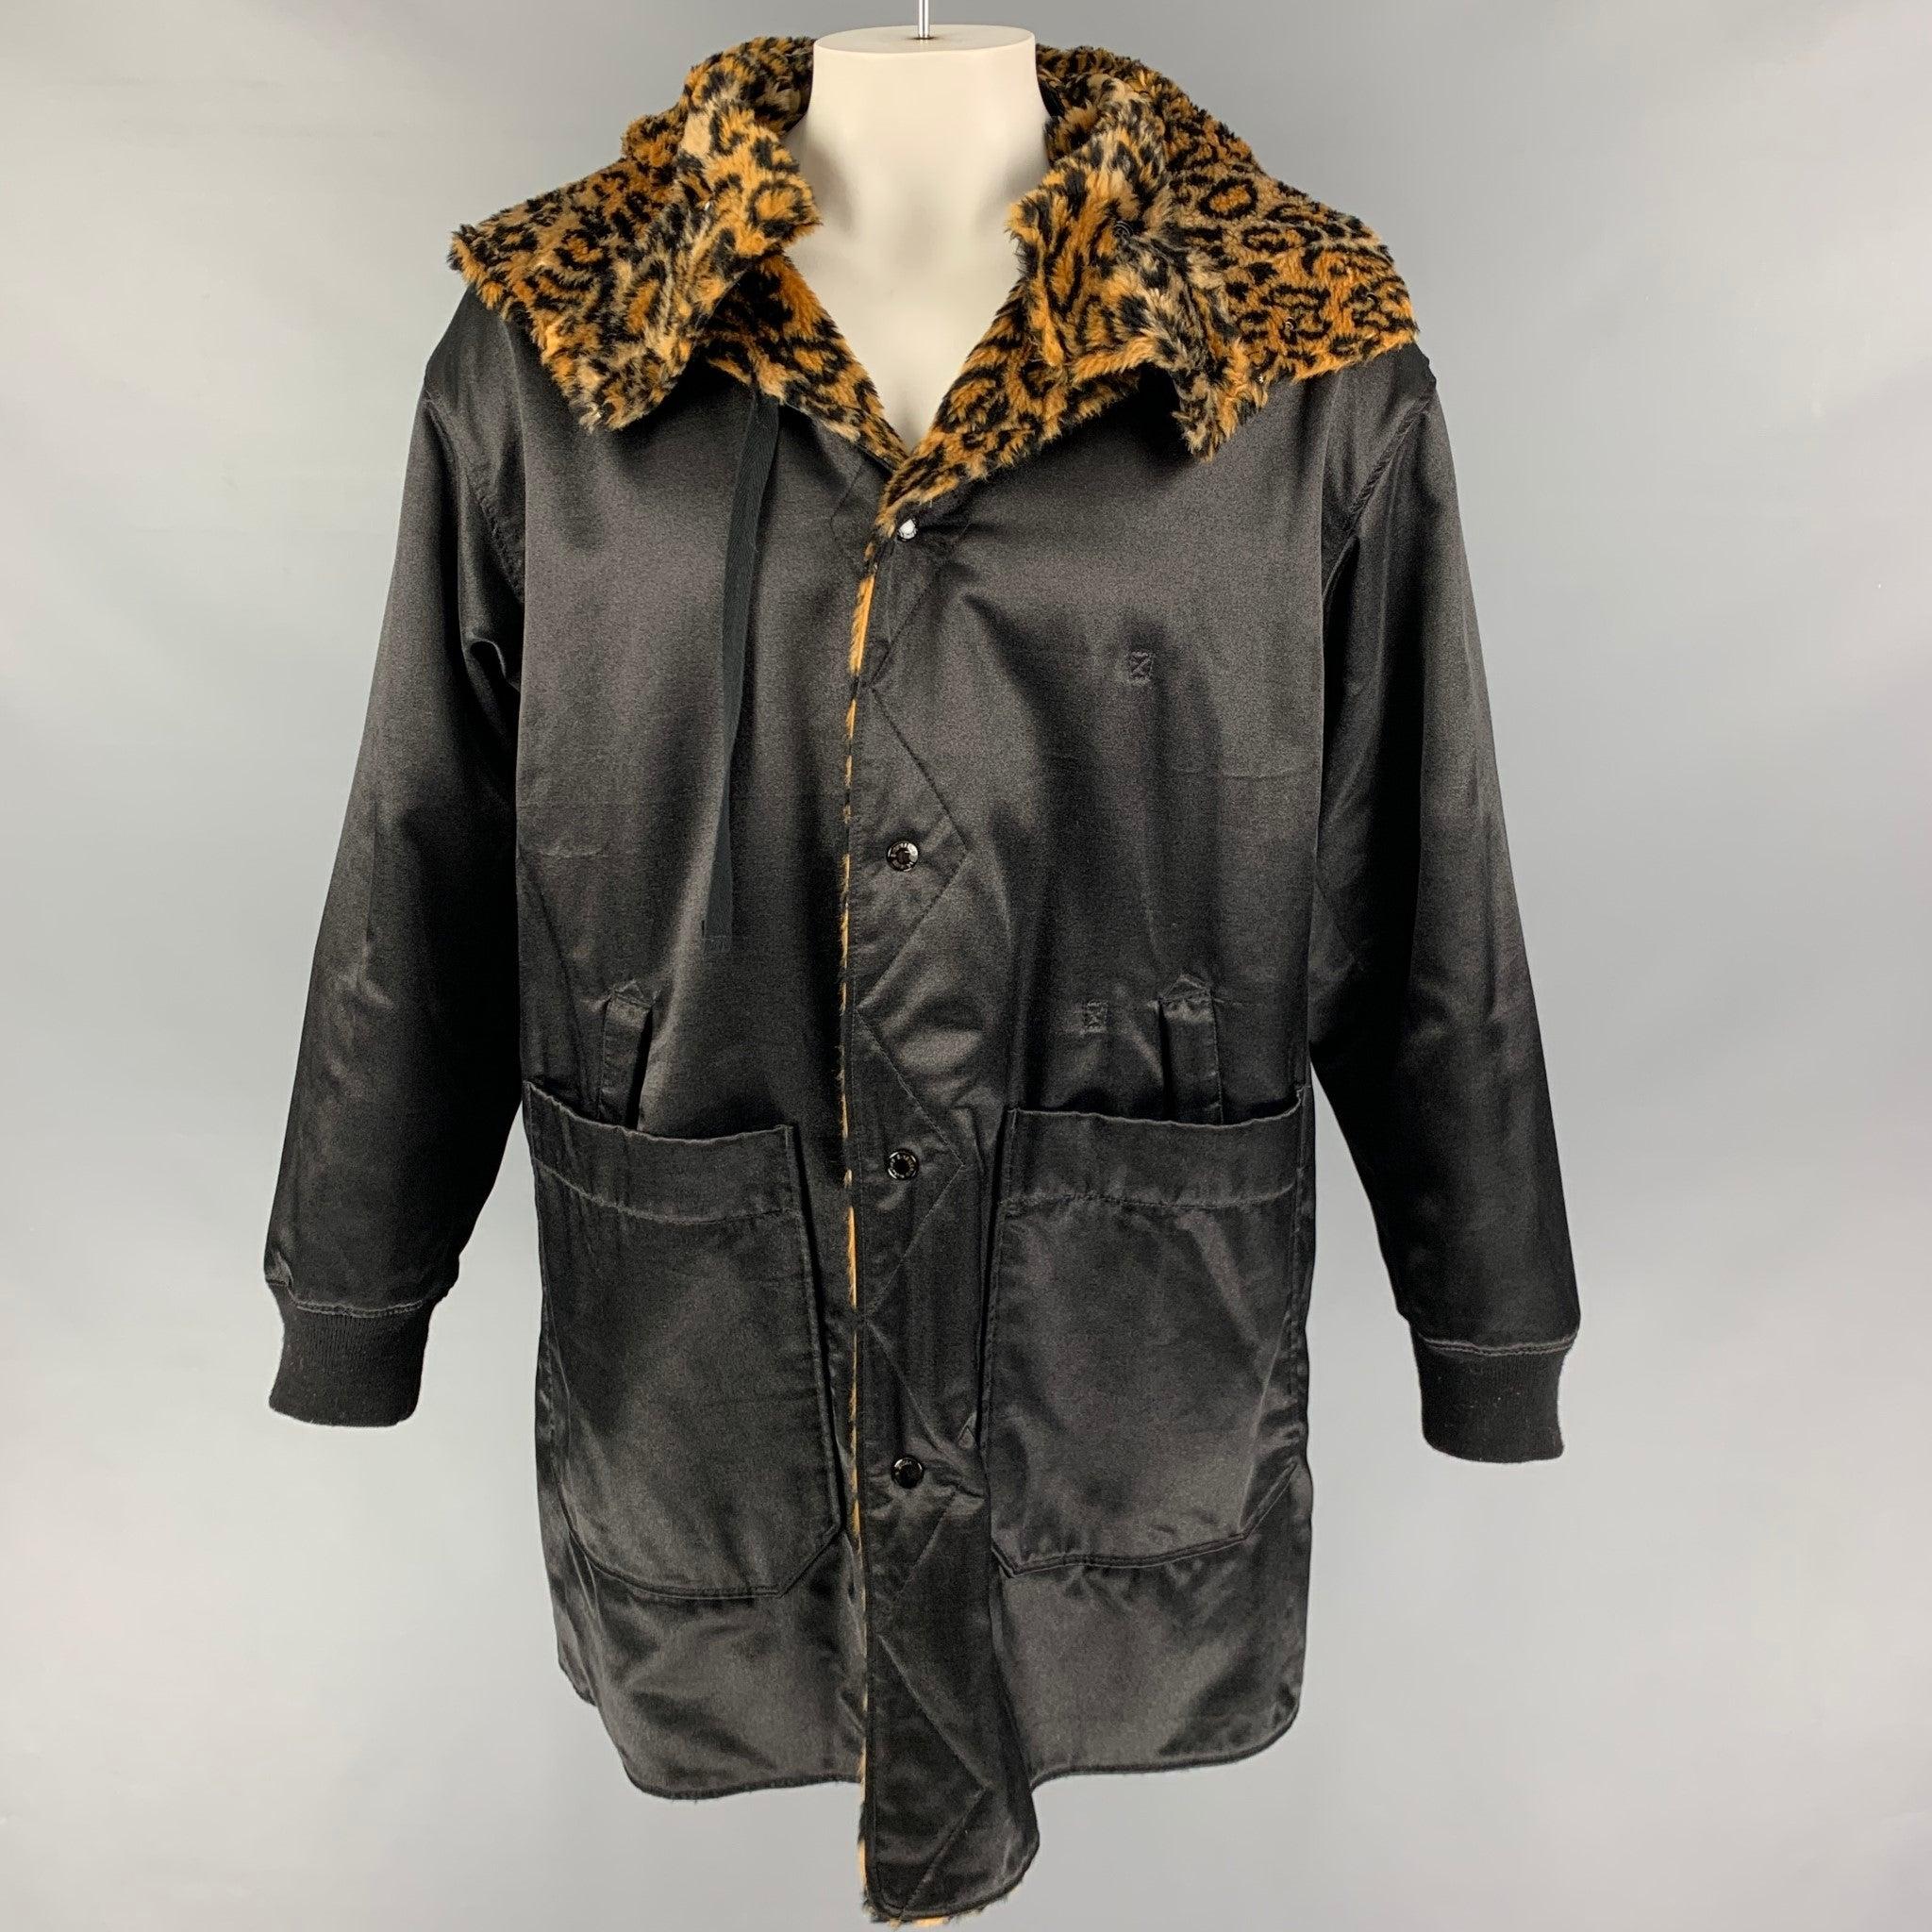 ENGINEERED GARMENTS coat comes in a black & tan animal print polyester / cotton featuring a reversible style, hooded, cut-out details, drawstring, slit pockets, and a snap button closure. Made in USA.
Very Good
Pre-Owned Condition. 

Marked:   L 